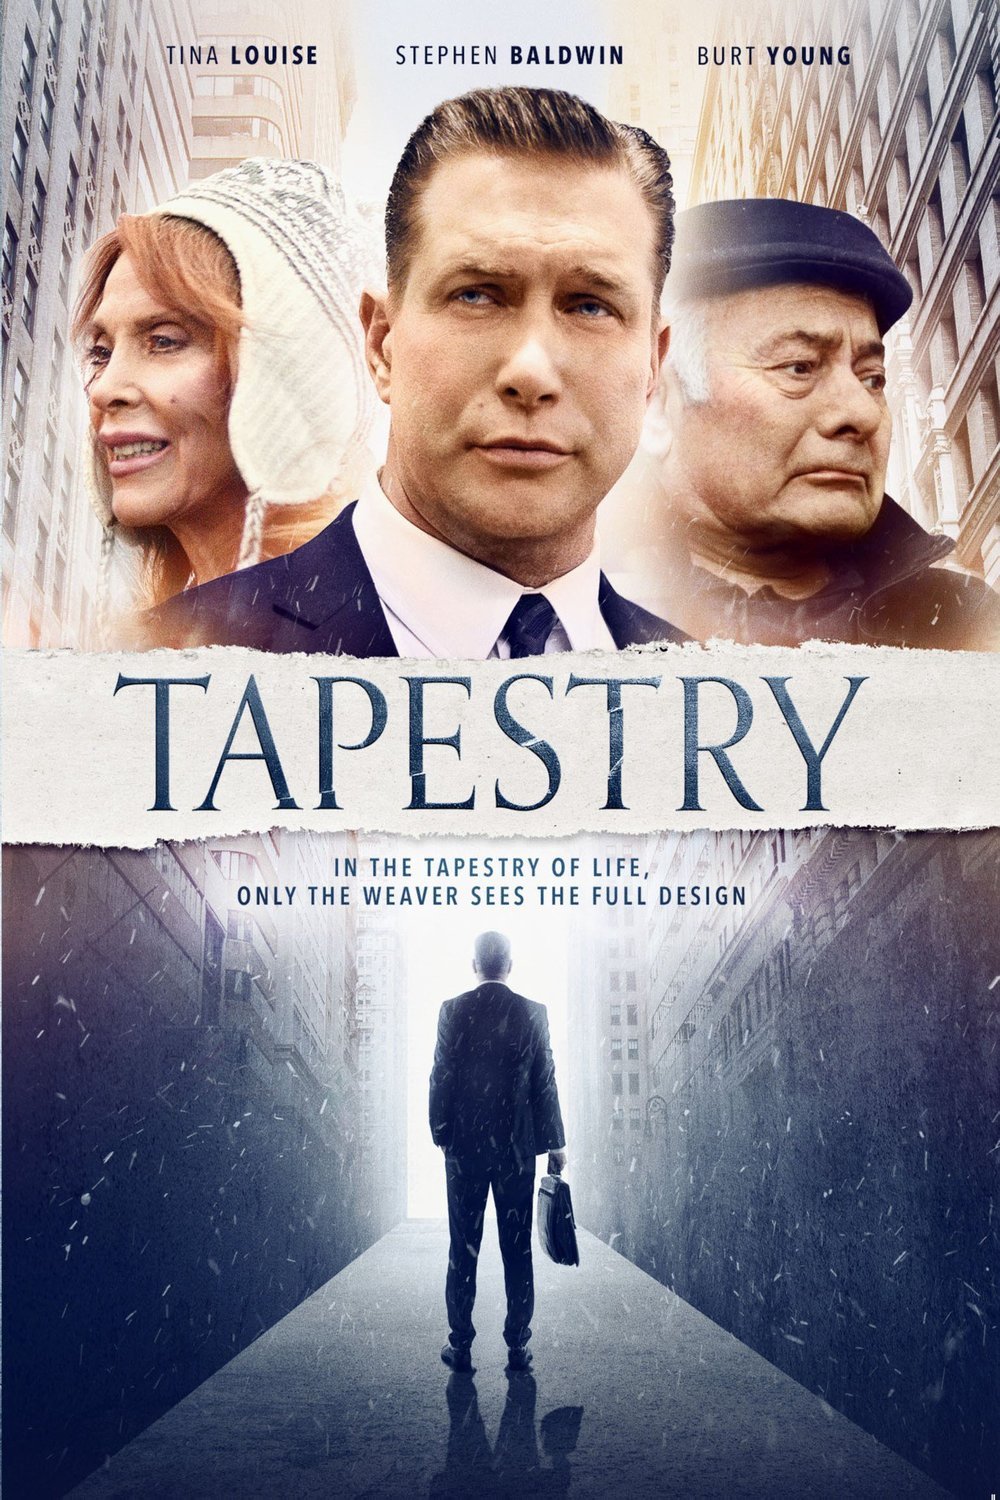 Poster of the movie Tapestry